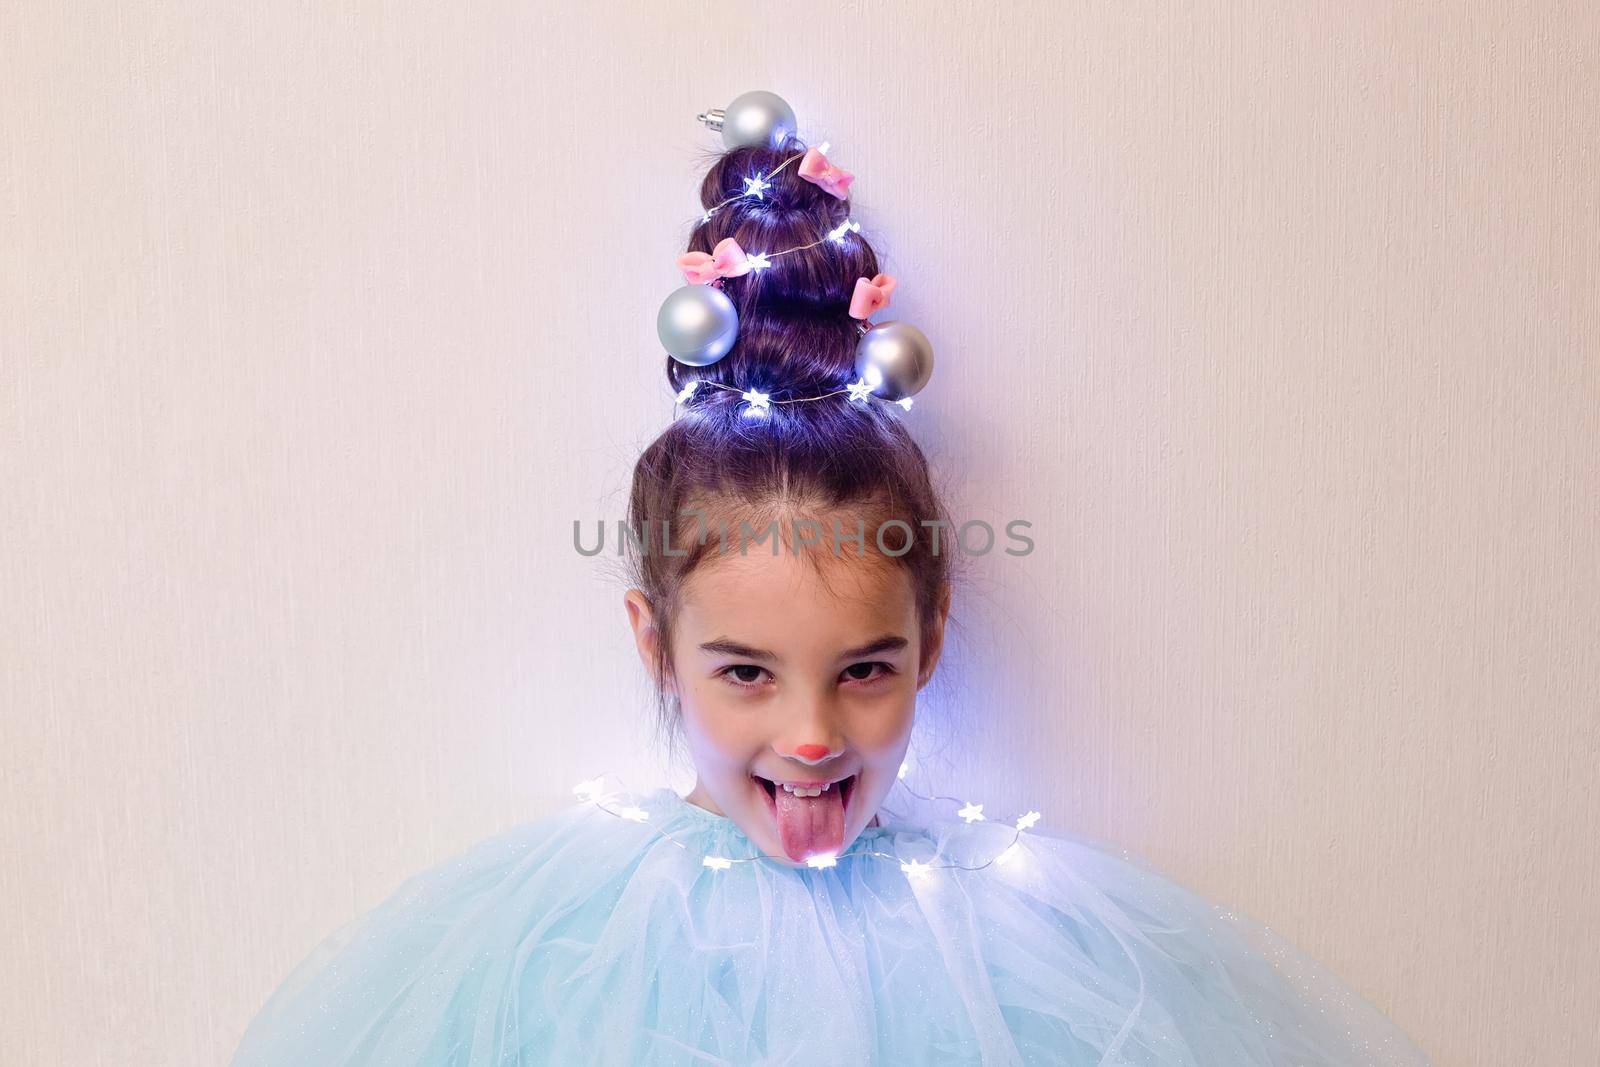 Funny girl with a hairstyle in the form of a Christmas tree by Zakharova